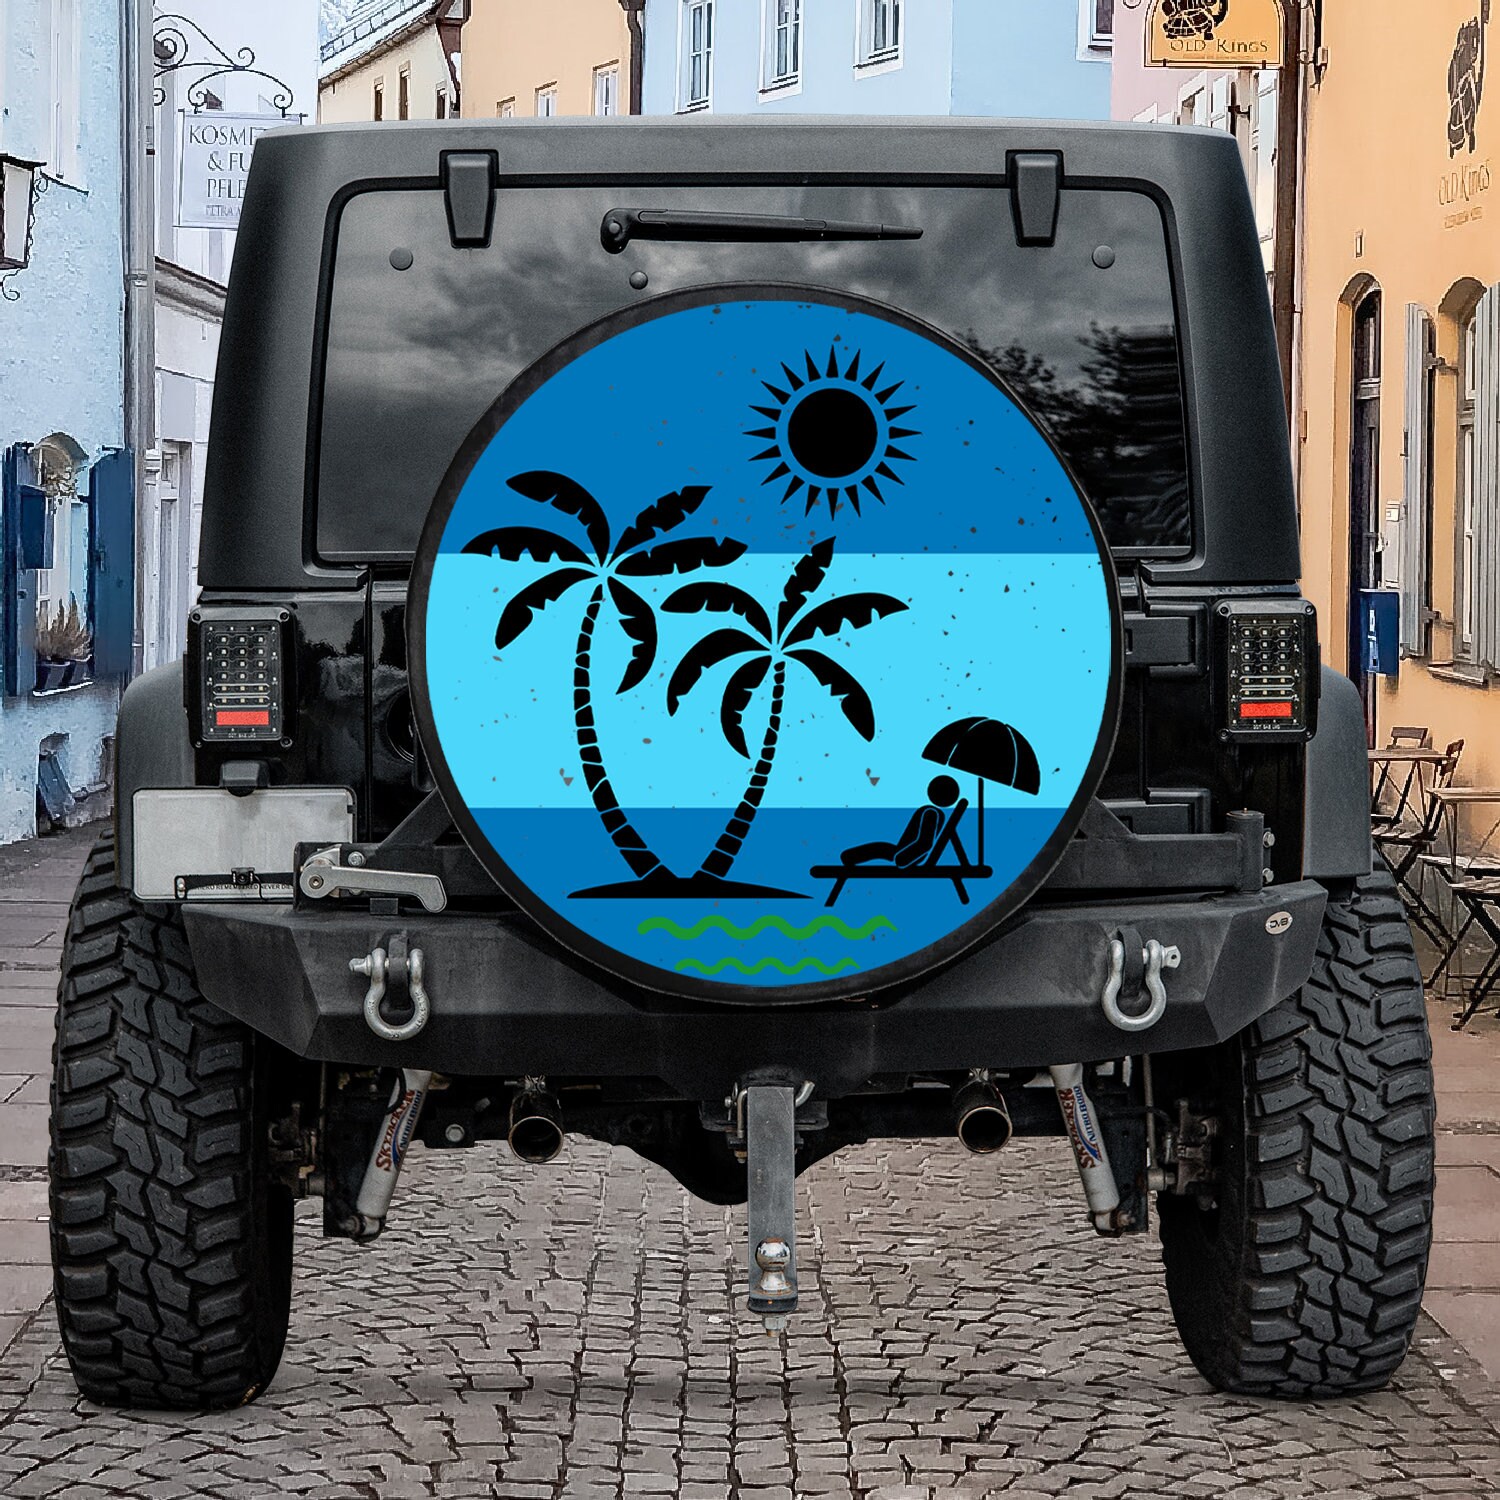 Moslion Beach Spare Tire Cover Summer Beach Palm Tree Ocean Waves Seagull Surfing in Sea Waterproof Wheel Covers for Jeep Trailer RV SUV Truck Car Vehicles 14 Inch Blue Yellow 